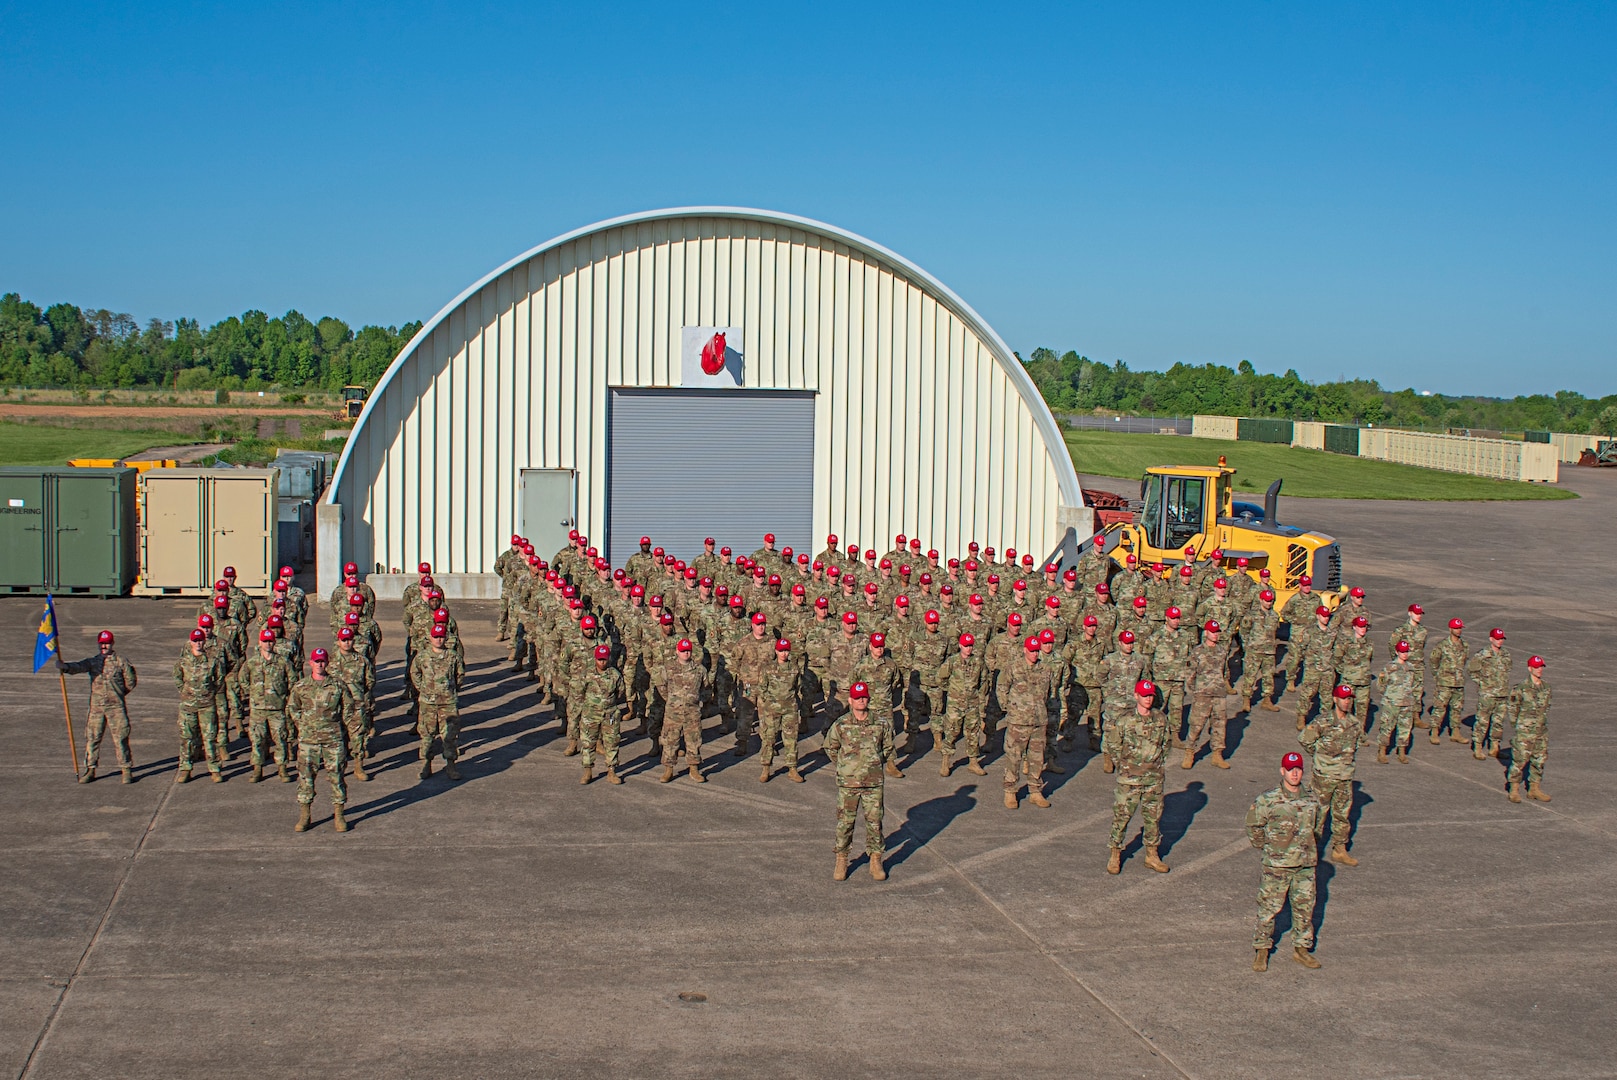 Members of the 201st Rapid Engineer Deployable Heavy Operational Repair Squadron Engineers, or REDHORSE, Detachment 1, pose for a picture at Biddle Air National Guard Base in Horsham, Pennsylvania, May 15, 2021. This is the first official group photo of the 201st REDHORSE Det. 1 in the Operational Camouflage Pattern, or OCP, utility uniform on base since they returned from their recent deployment overseas.